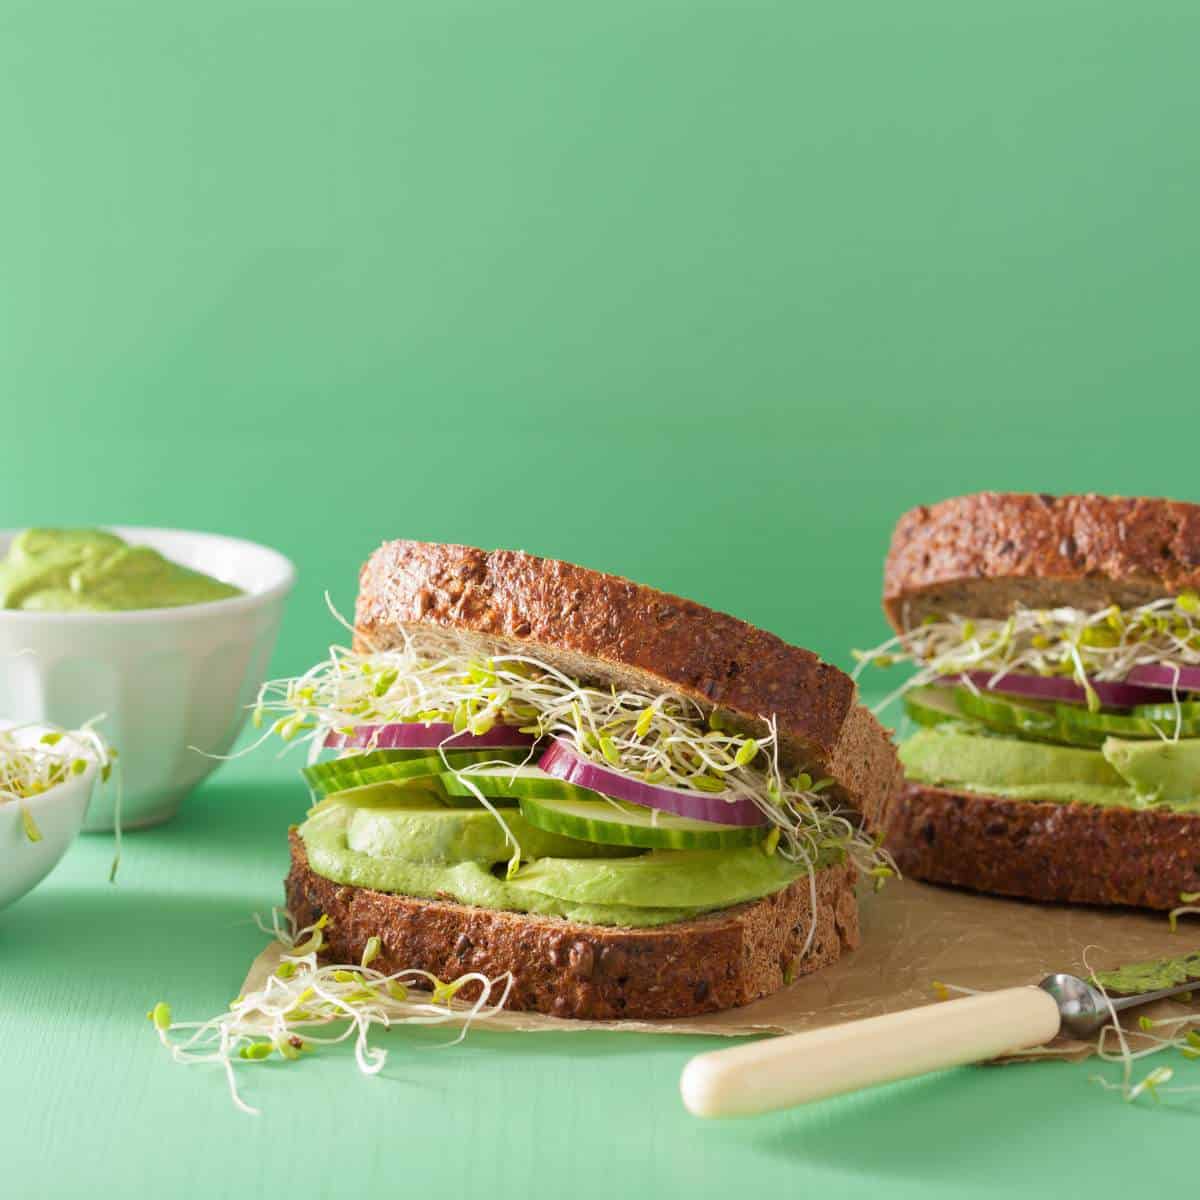 Two sandwiches with avocado and sprouts on a green background. Additionally, learn how to store alfalfa sprouts.